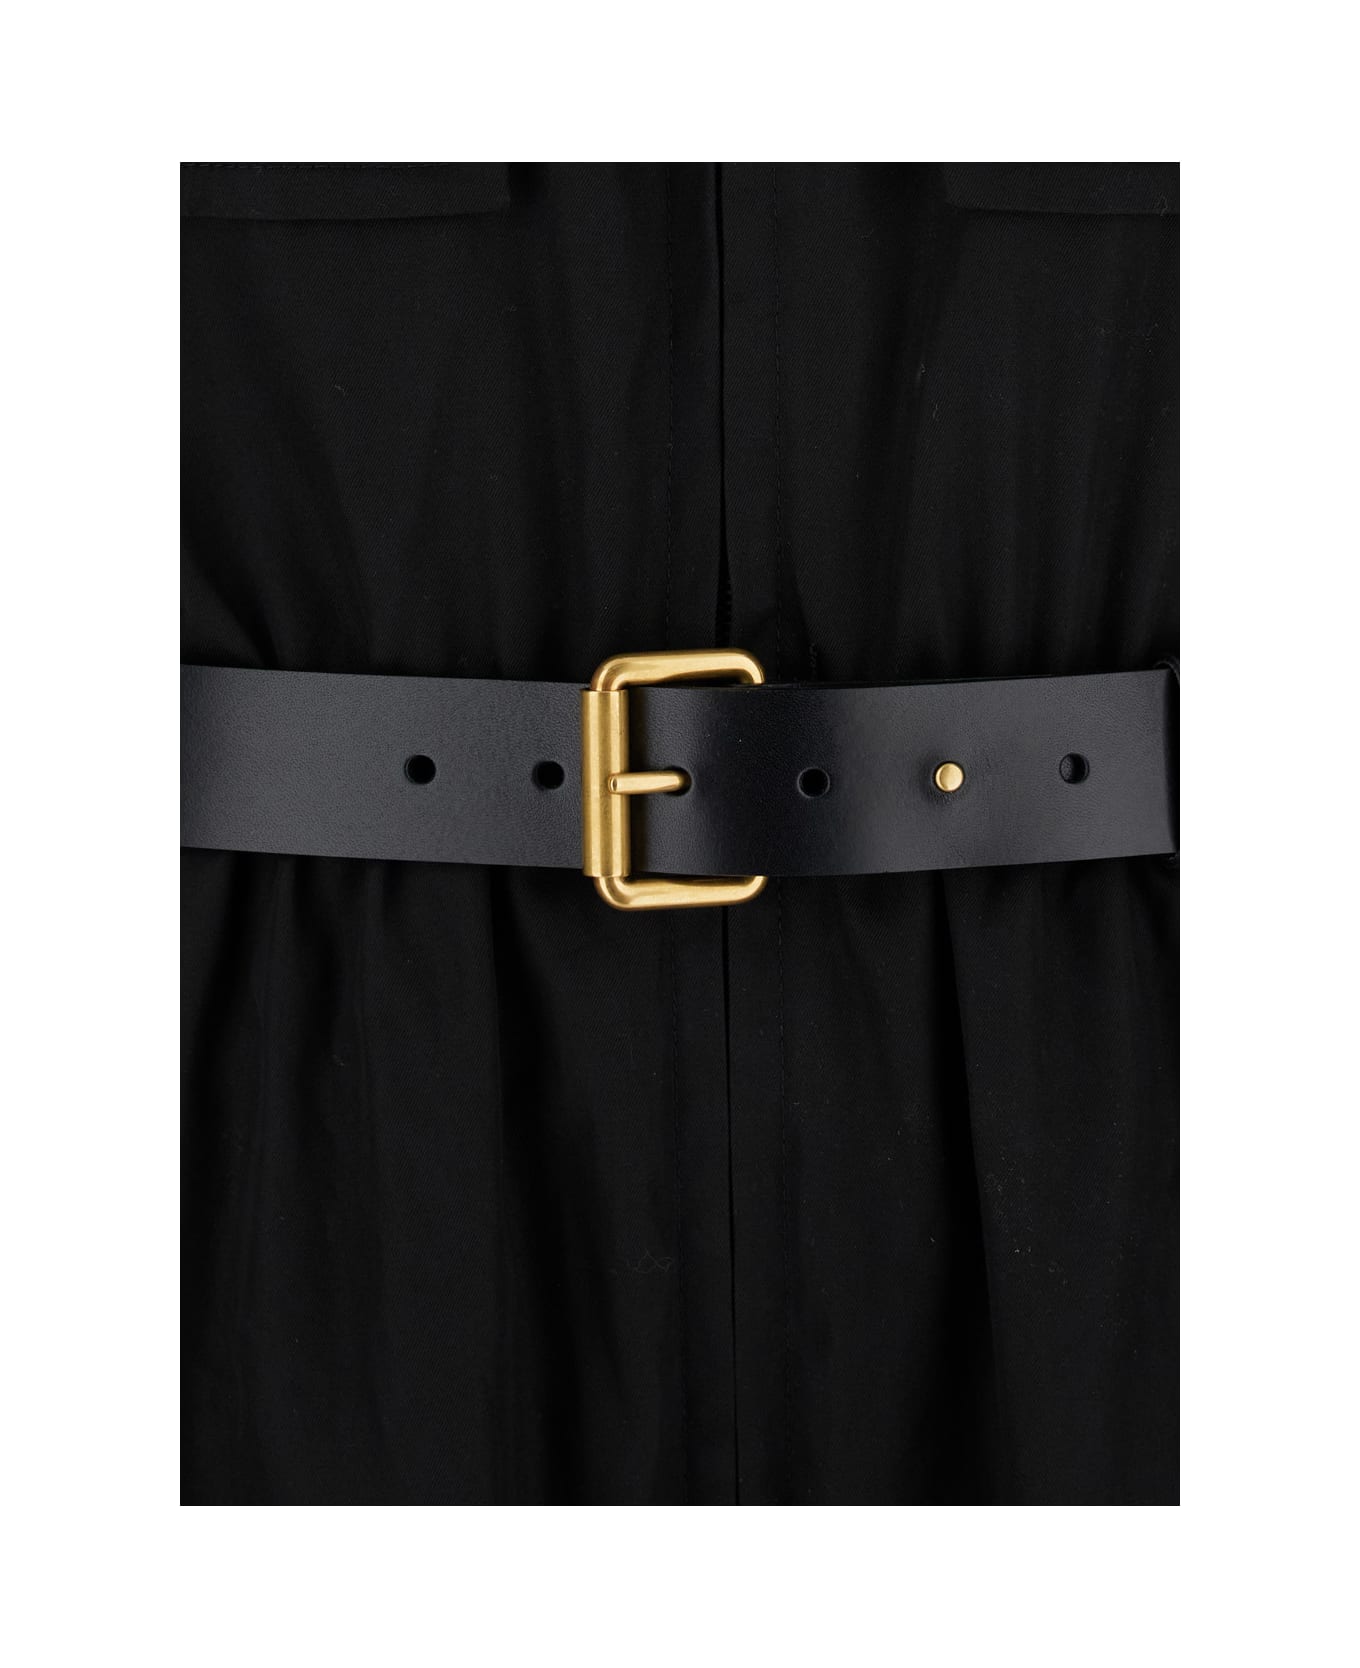 Saint Laurent Black Jumpsuit With Pockets And Belt In Cotton Woman - BLACK ジャンプスーツ